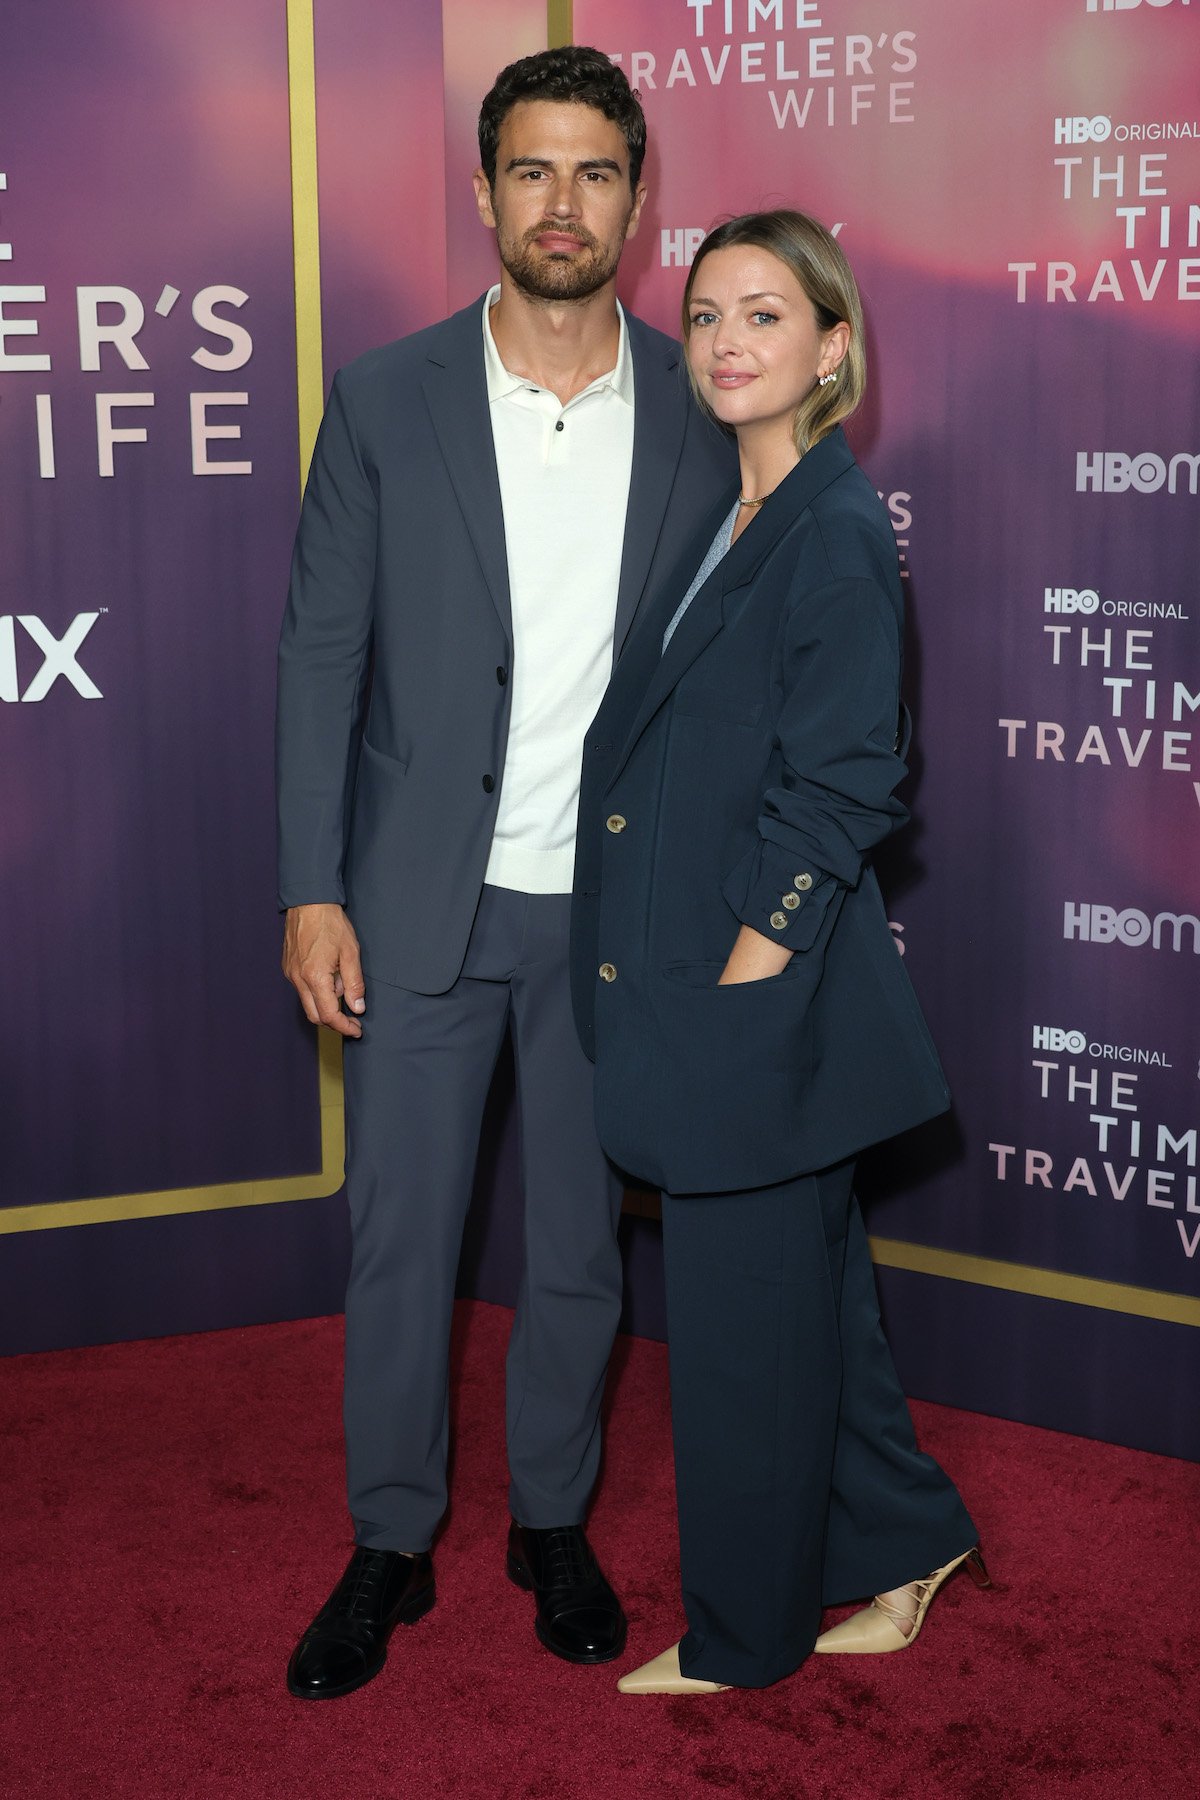 Theo James and wife Ruth Kearney at the premiere of 'The Time Traveler's Wife'